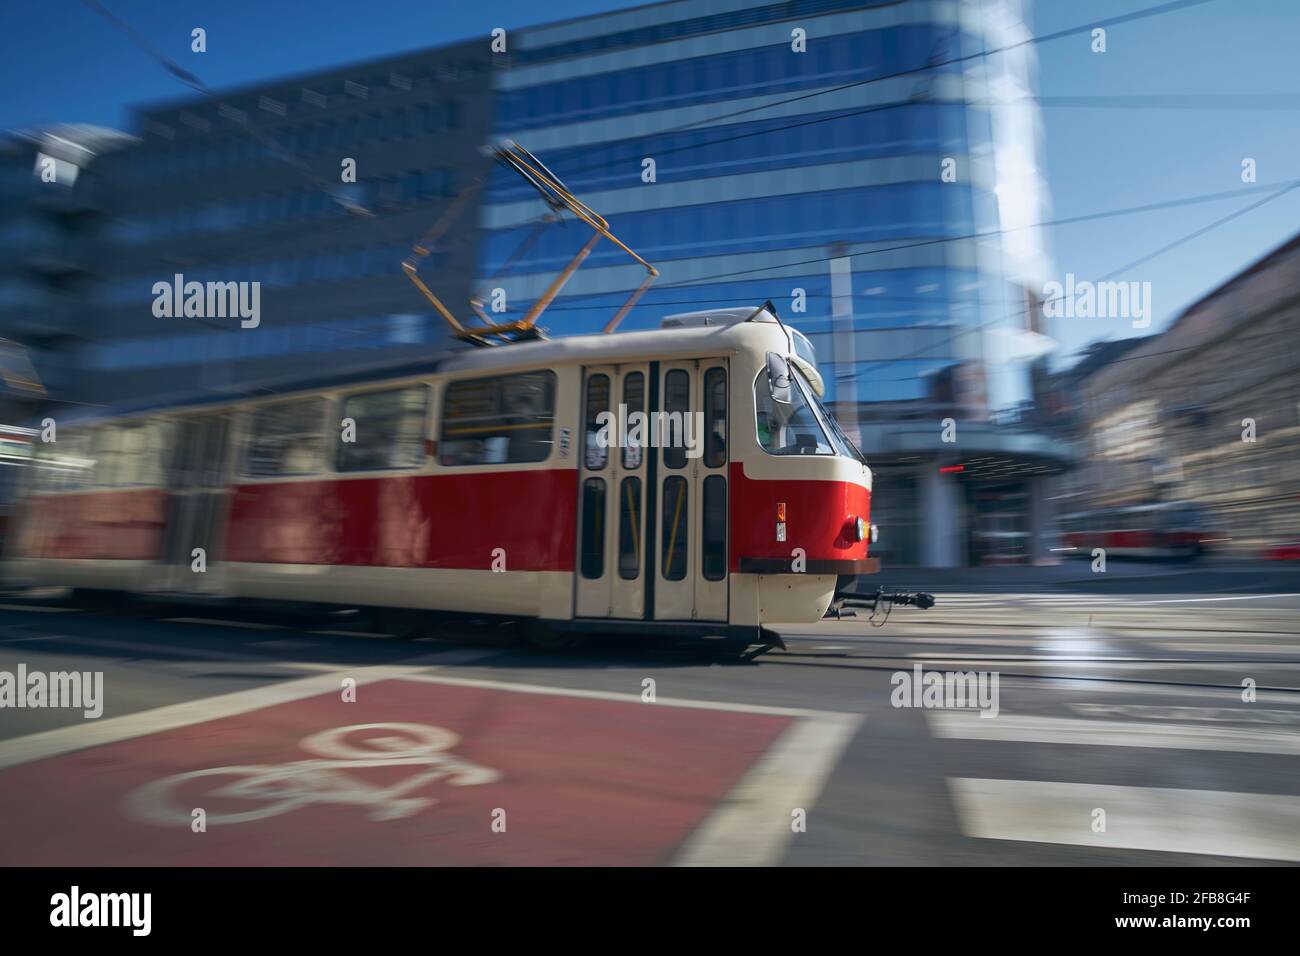 Tram of public transportation in blurred motion against crossroad. Daily life in city. Prague, Czech Republic. Stock Photo